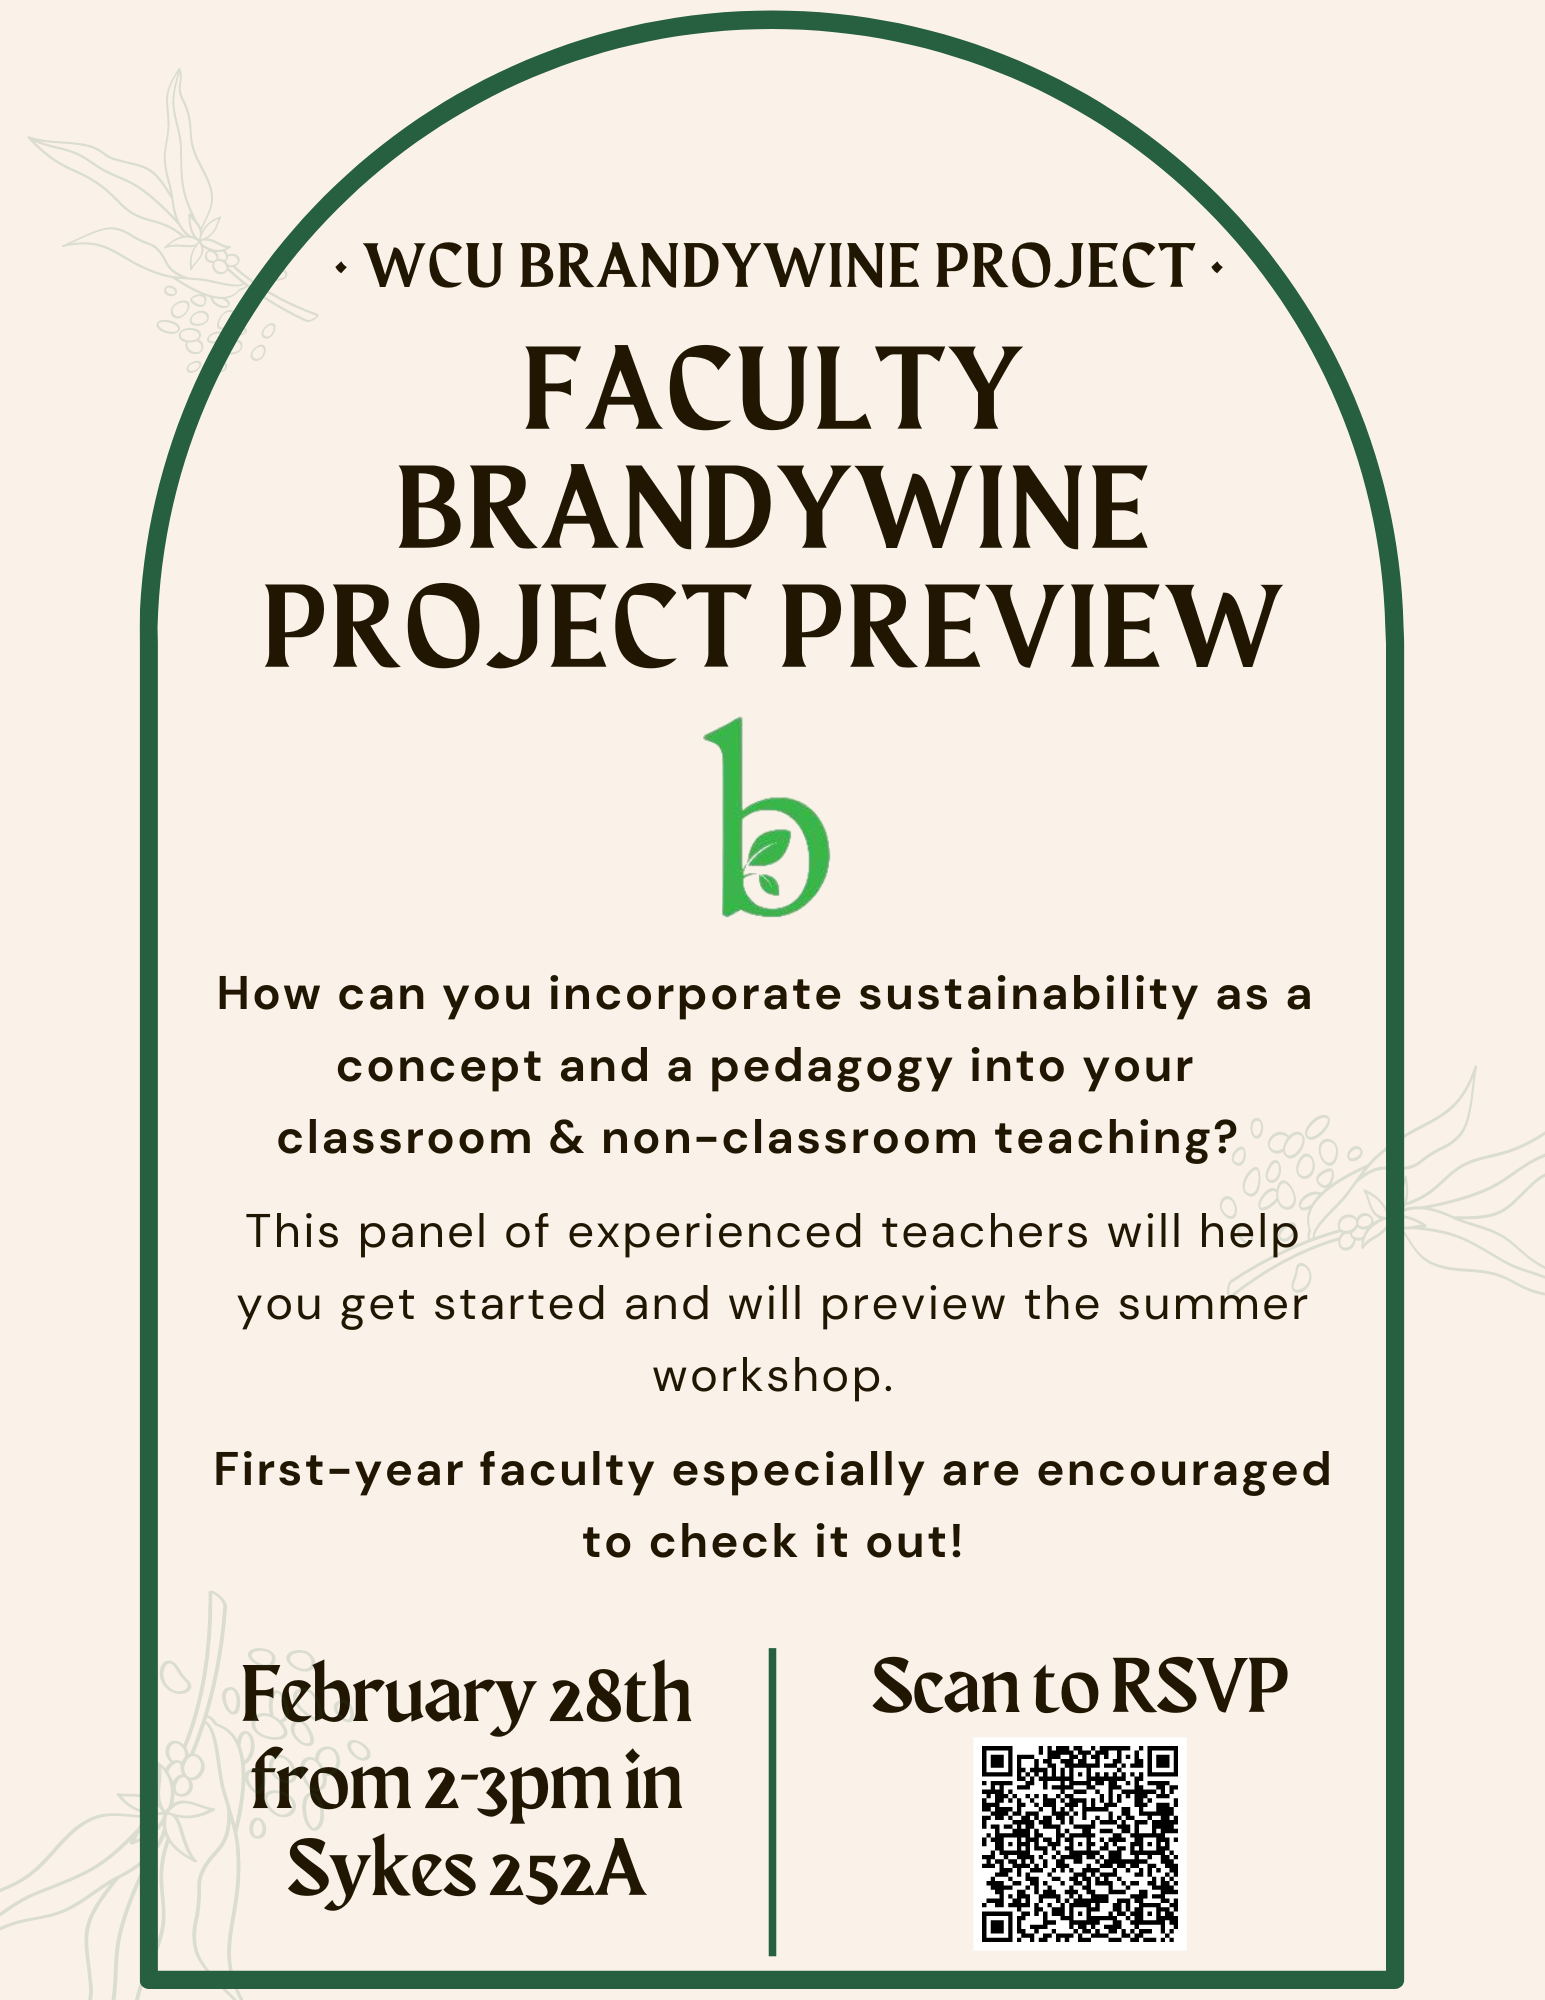 brandywine project preview feb 28th 2pm